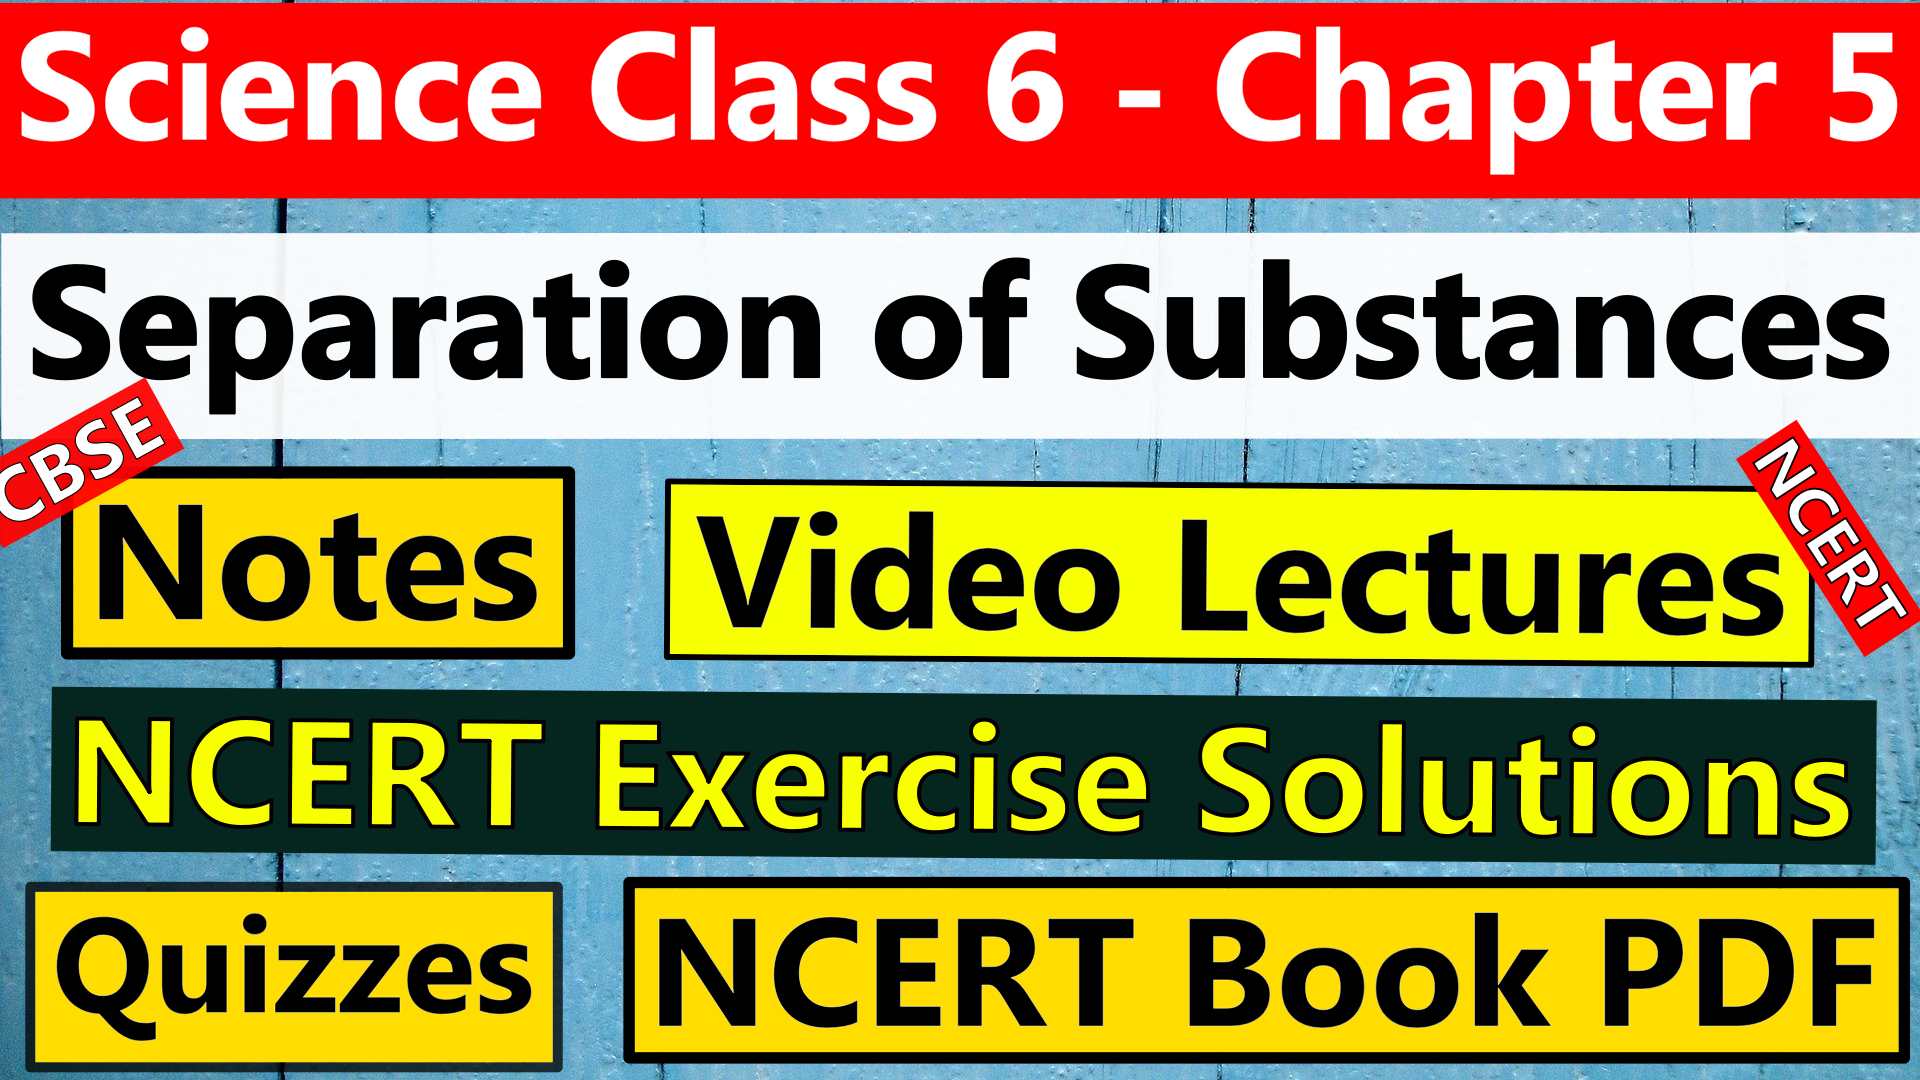 CBSE Science Class 6 - Chapter 5 -Separation of Substances- Notes, Video Lecture, NCERT Exercise Solution, Quizzes, NCERT Book Chapter 5 PDF Download.